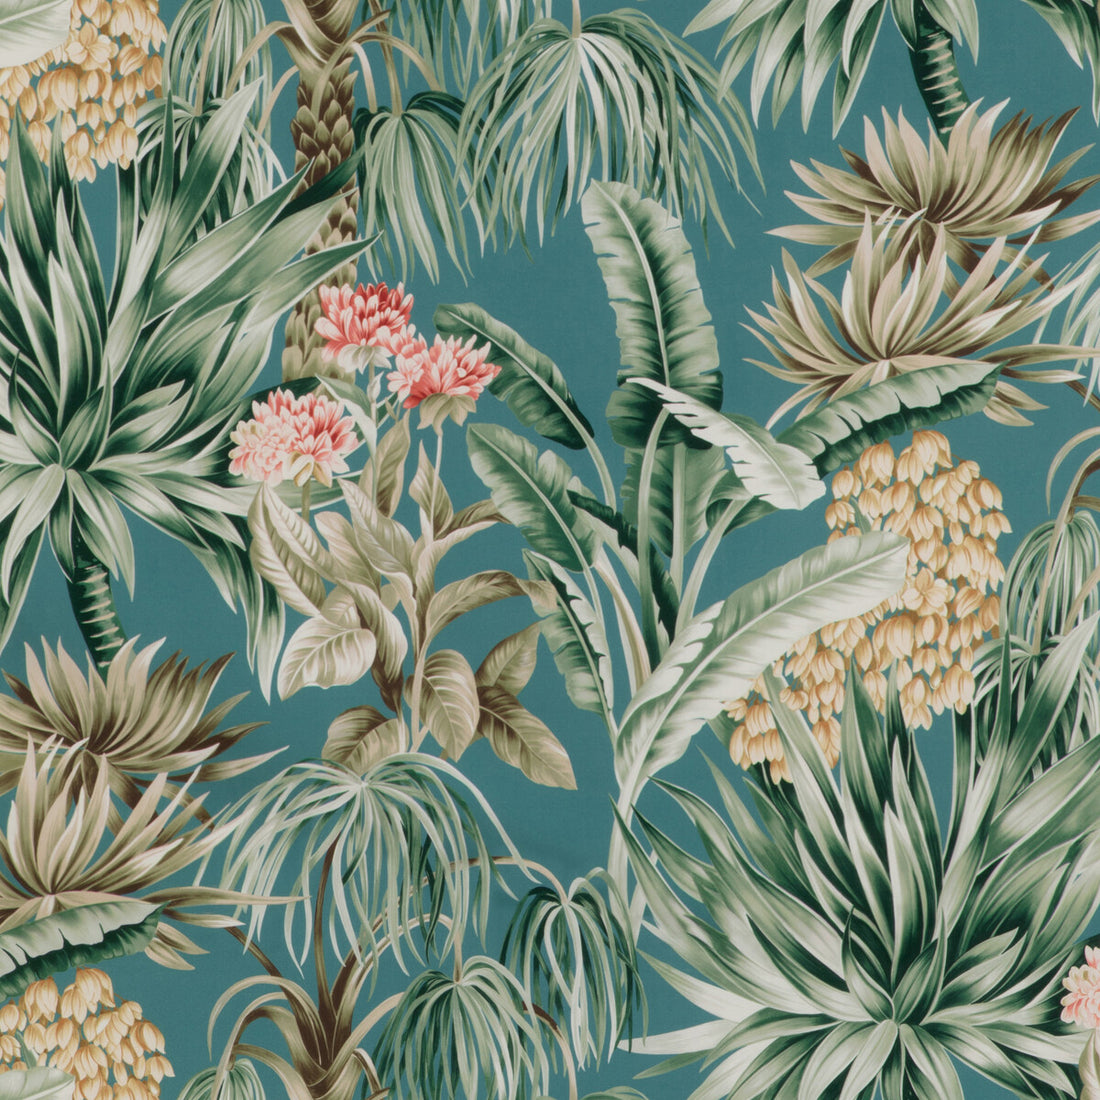 Caluya Print fabric in lagoon color - pattern 2020196.3519.0 - by Lee Jofa in the Mindoro collection